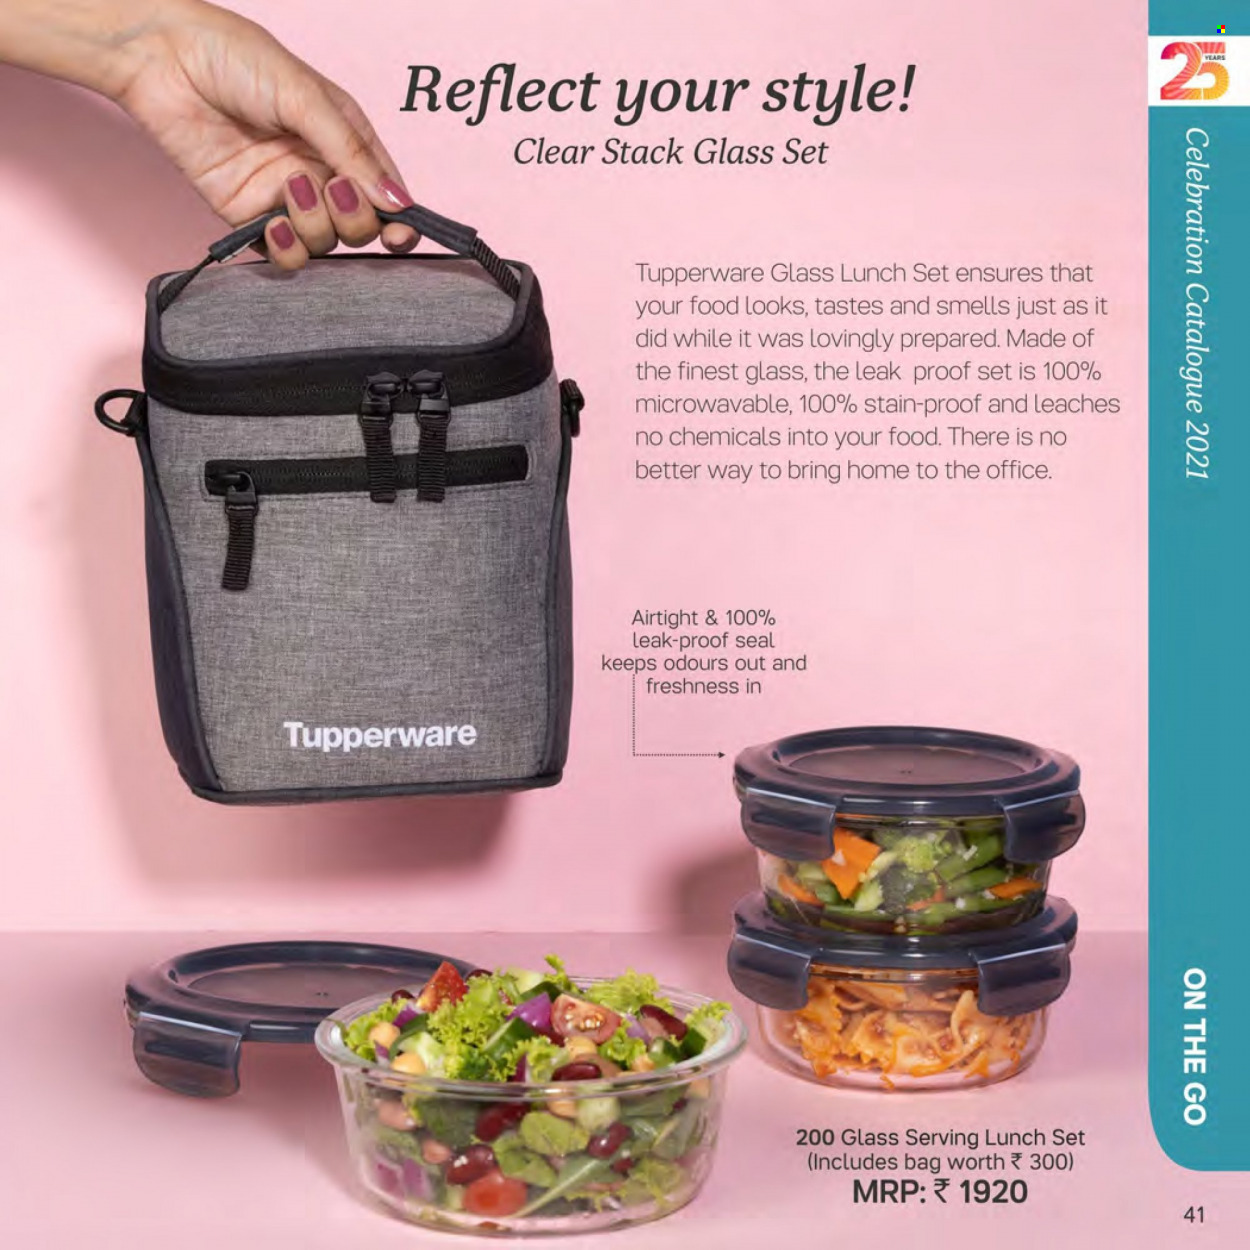 Tupperware offer . Page 41.